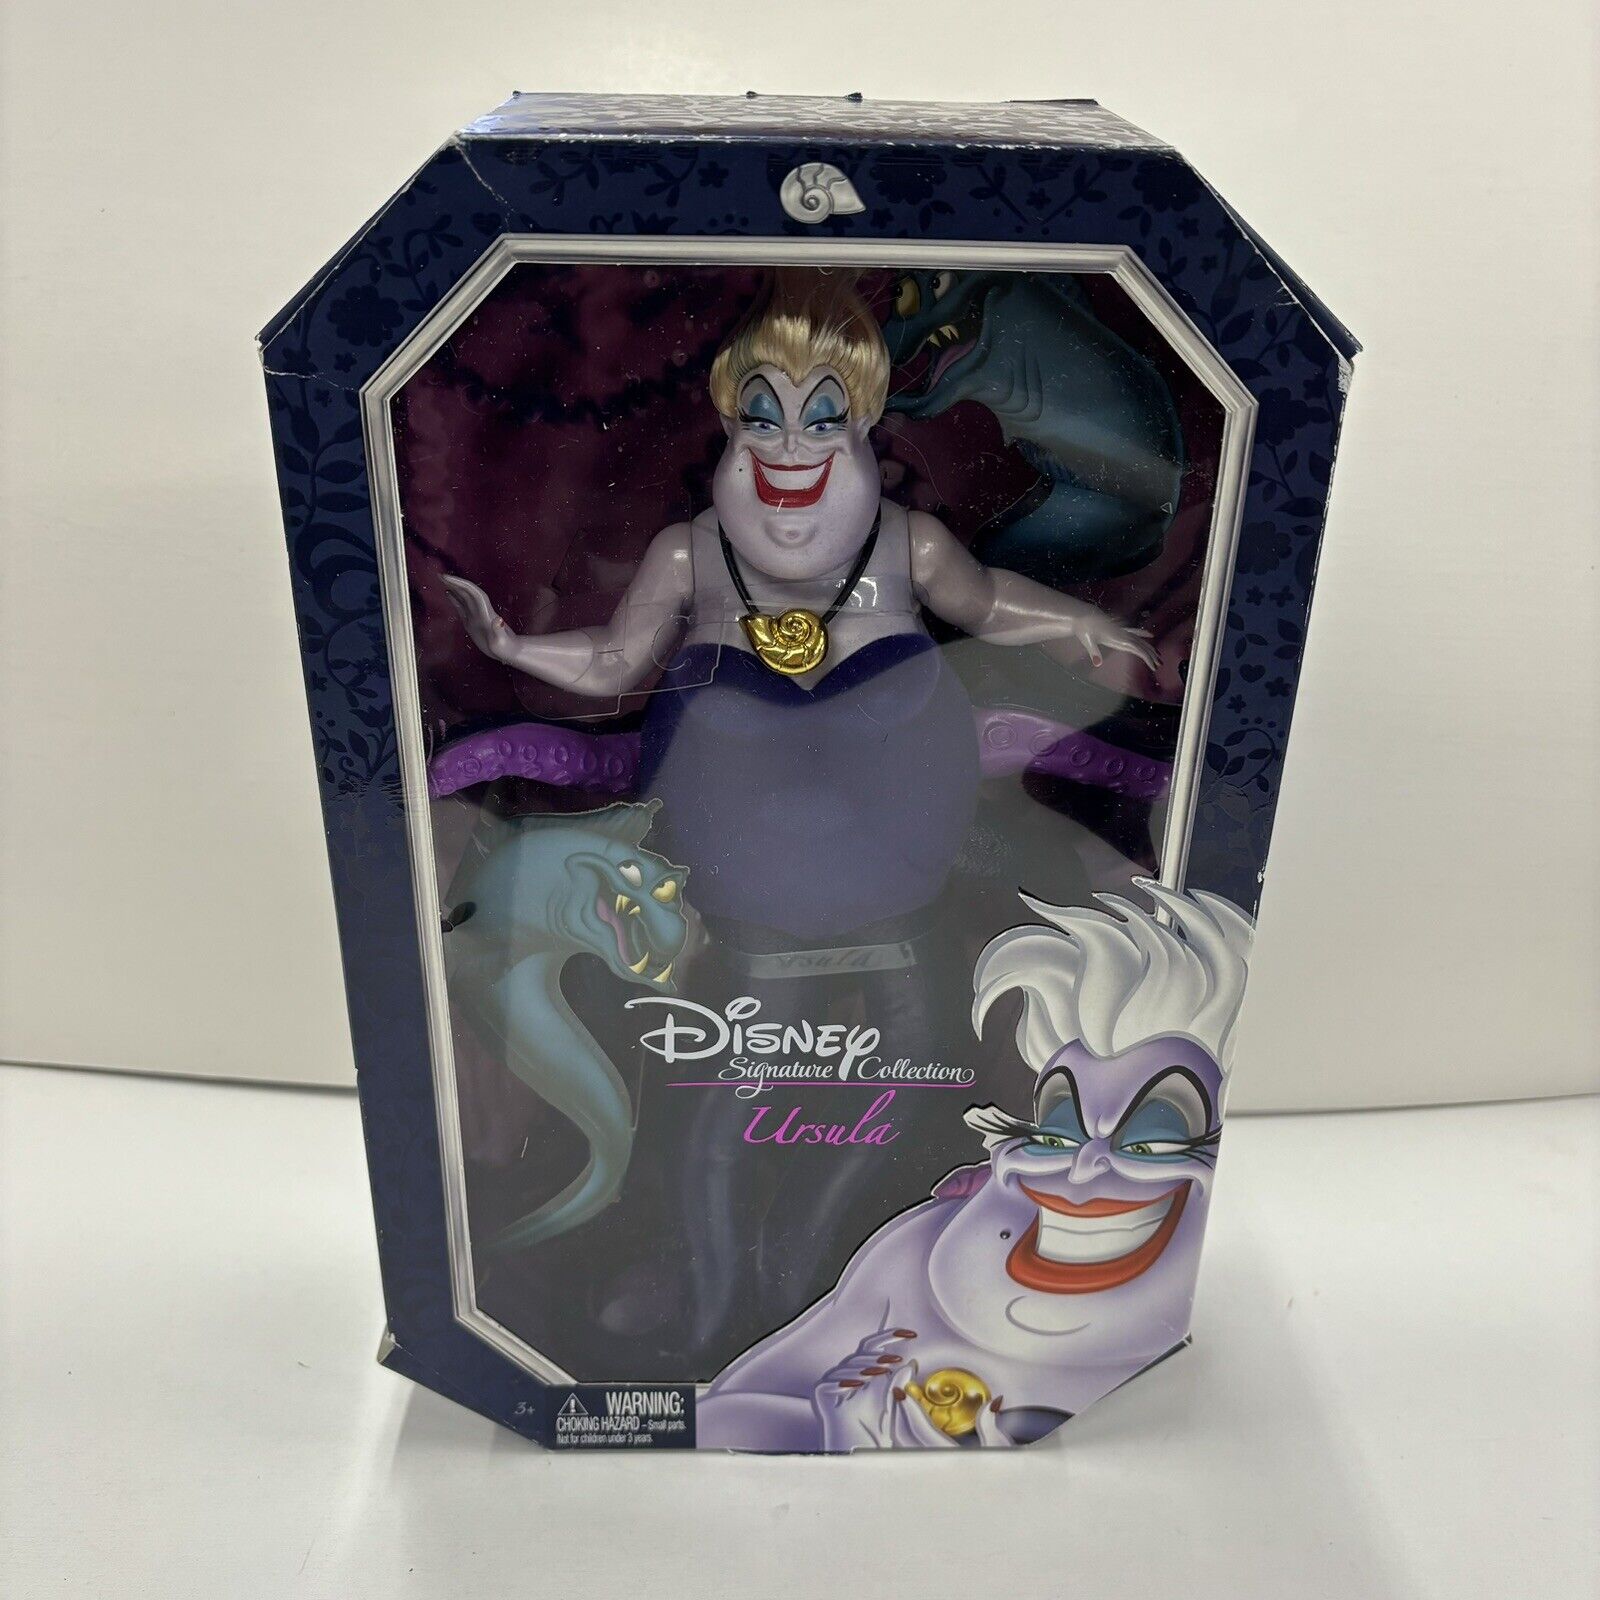 2013 Disney Signature Collection URSULA Doll from The Little Mermaid Villain 12\